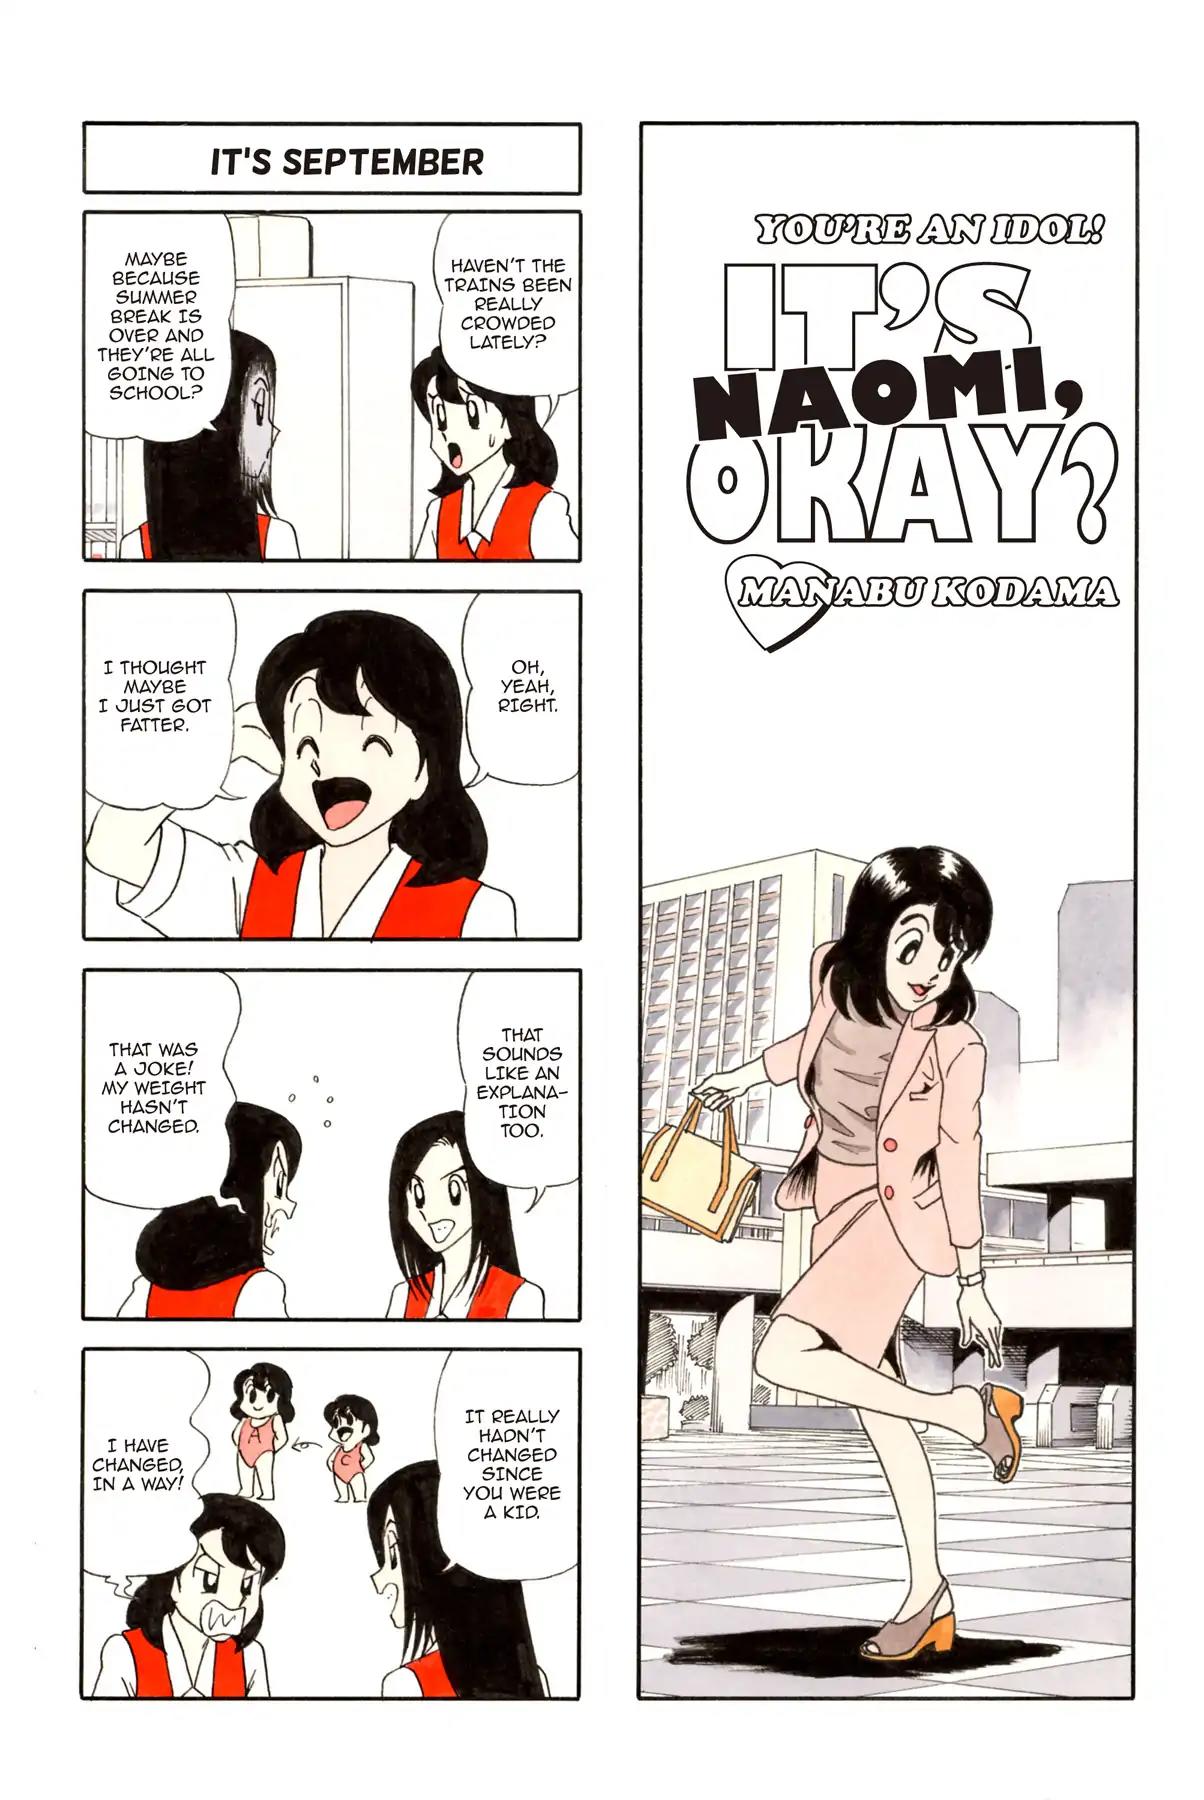 It's Naomi, Okay? After 16 Vol 1 Chapter 21